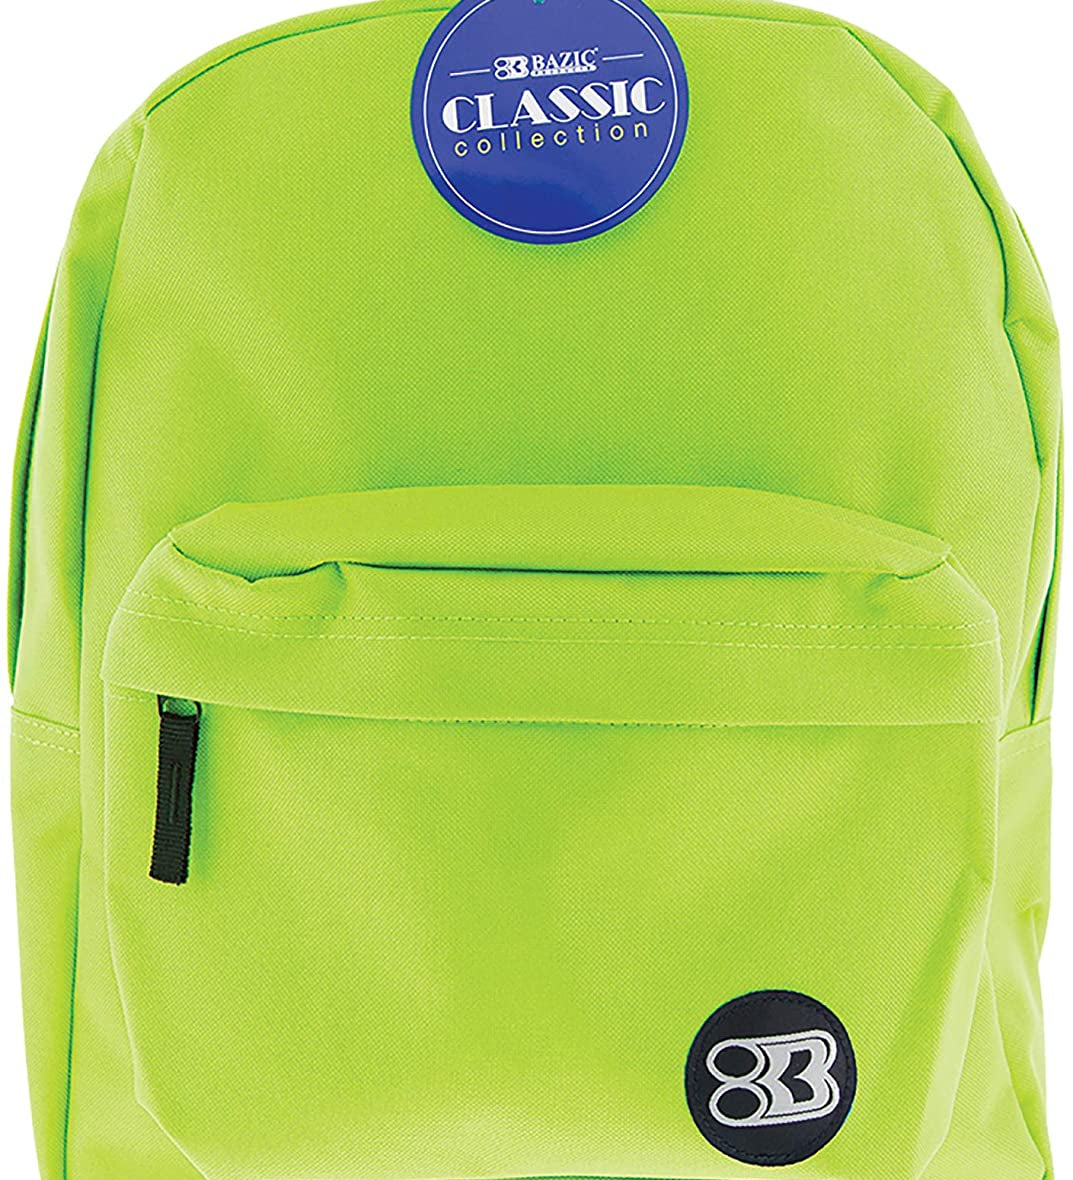 Classic Backpack 17 Inch